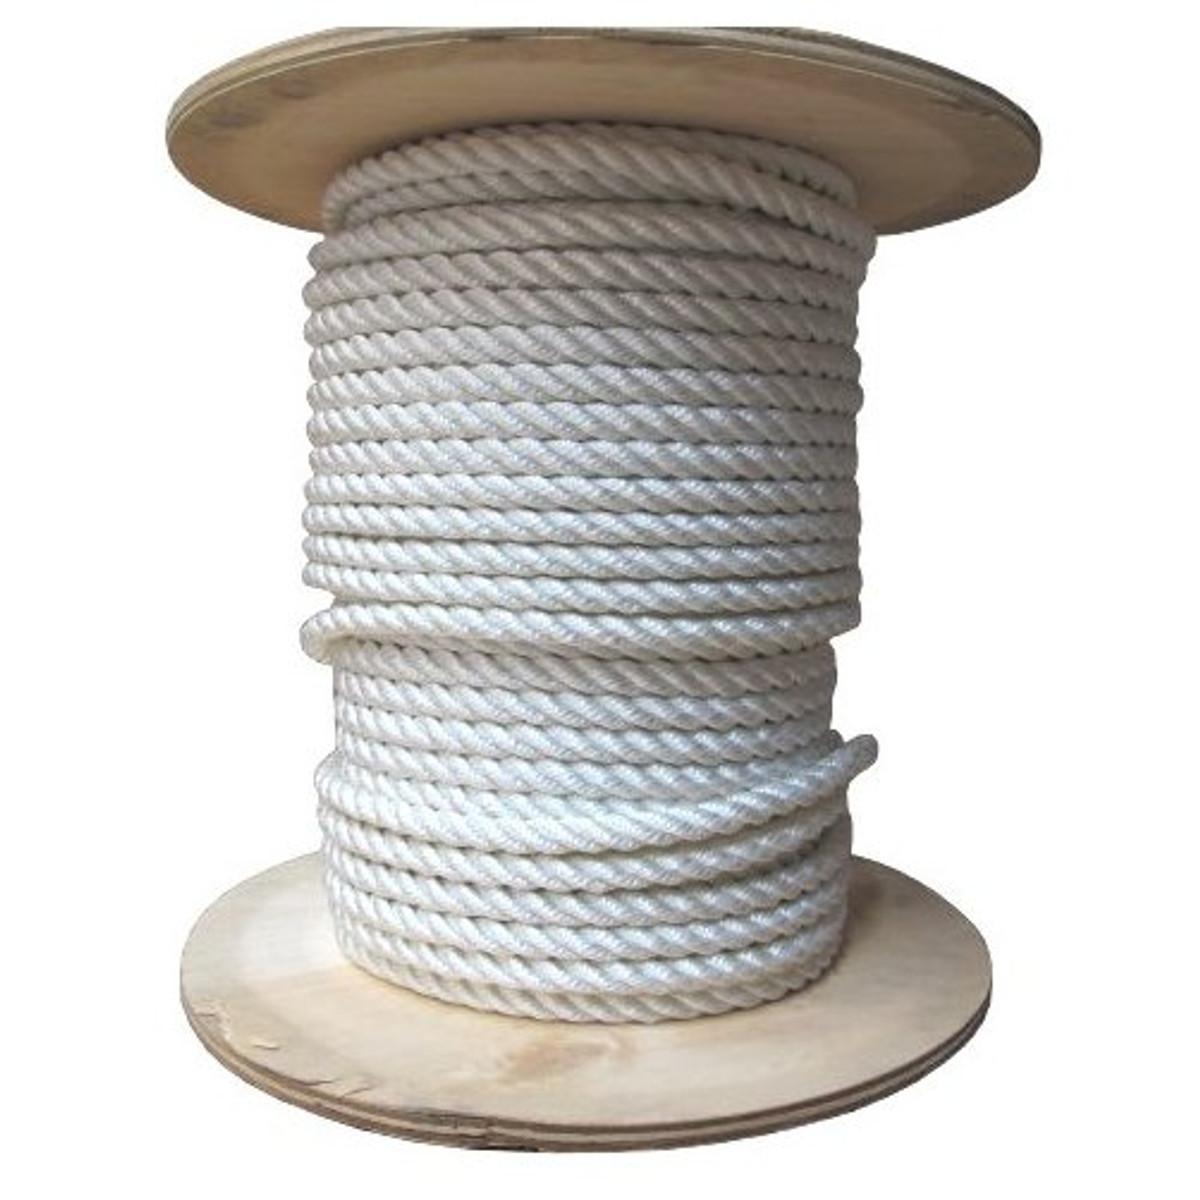 1/2 Nylon Rope (Per ft.) - Safe Work Load 525 lbs